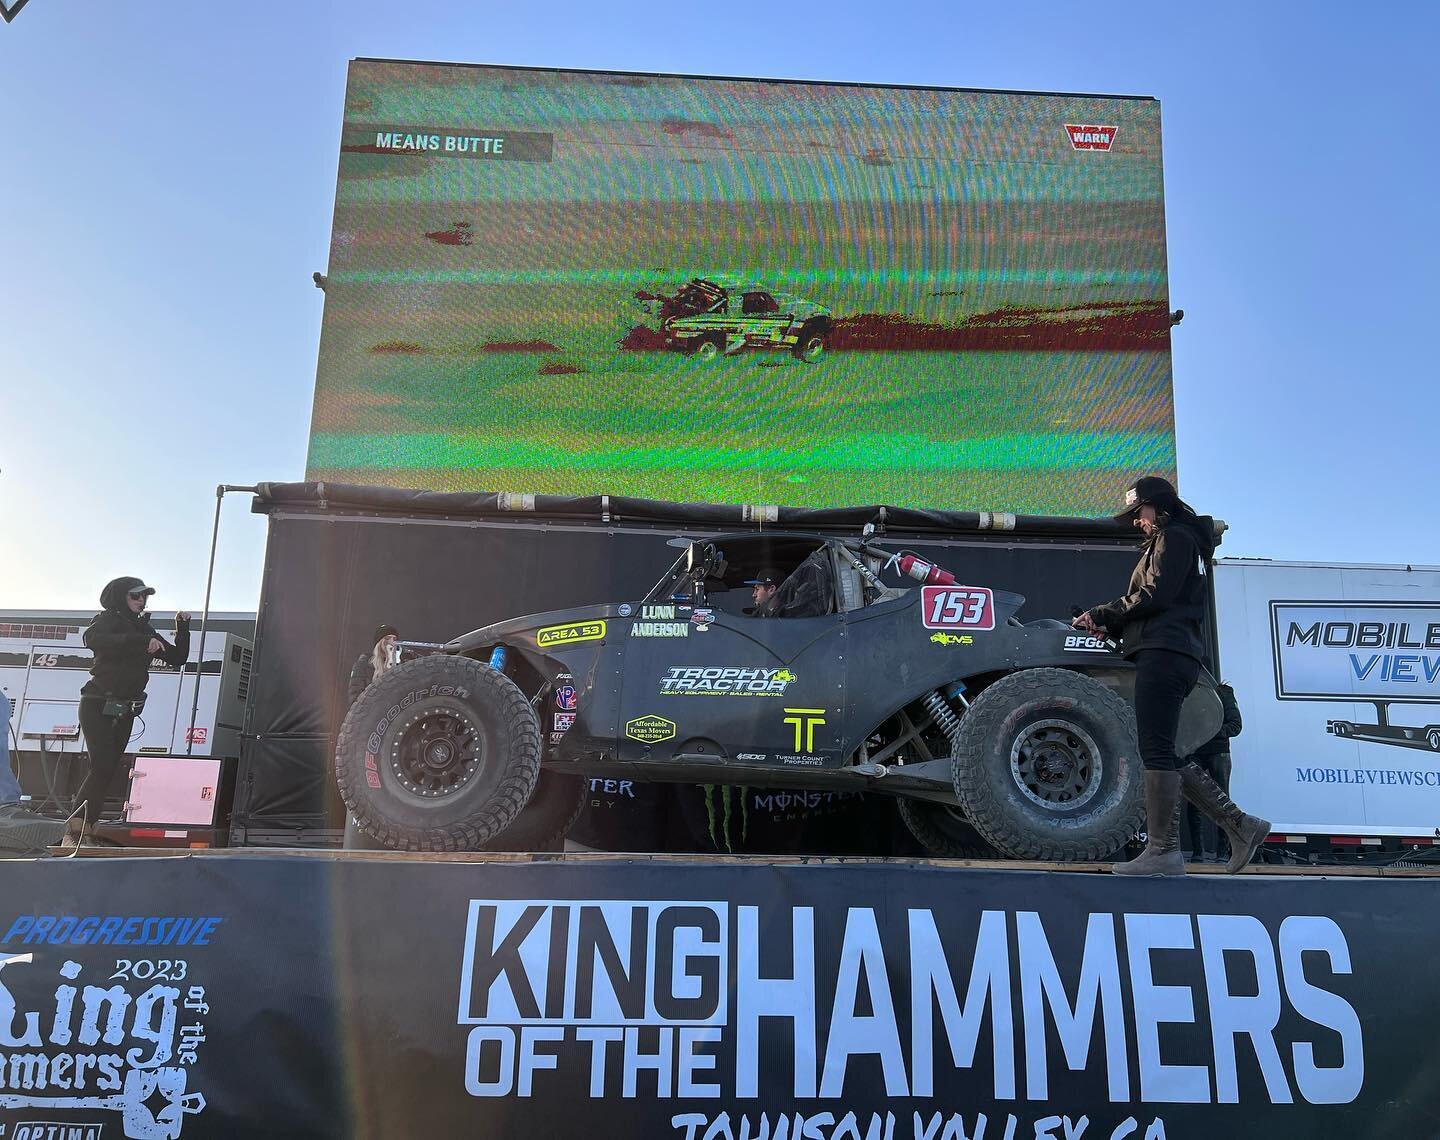 Unofficial First!! Back to Back KOH Champions! #AndersonBros #KingofHammers #KOH23 #BuiltonBFG #RigidNation #VPRacingFuel